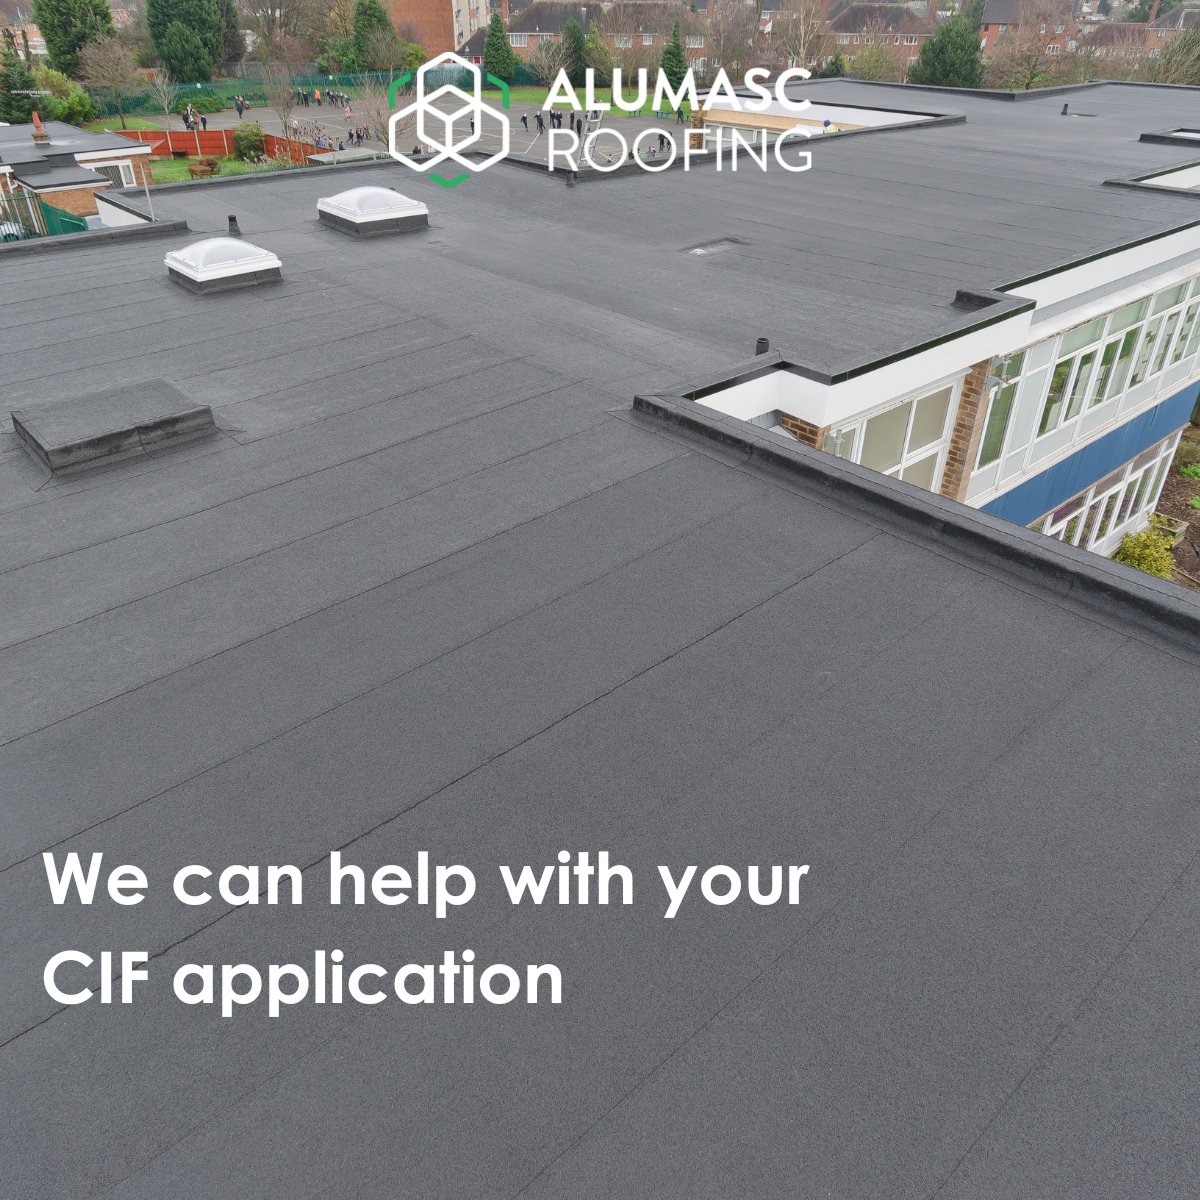 We work with Multi-Academy Trusts We work alongside surveyors to design sustainable long-term roofing solutions We provide all the calculations that you need to meet your carbon reduction targets using our CO2 neutralising roofing systems My local contact: alumascroofing.com/contact-us/are…